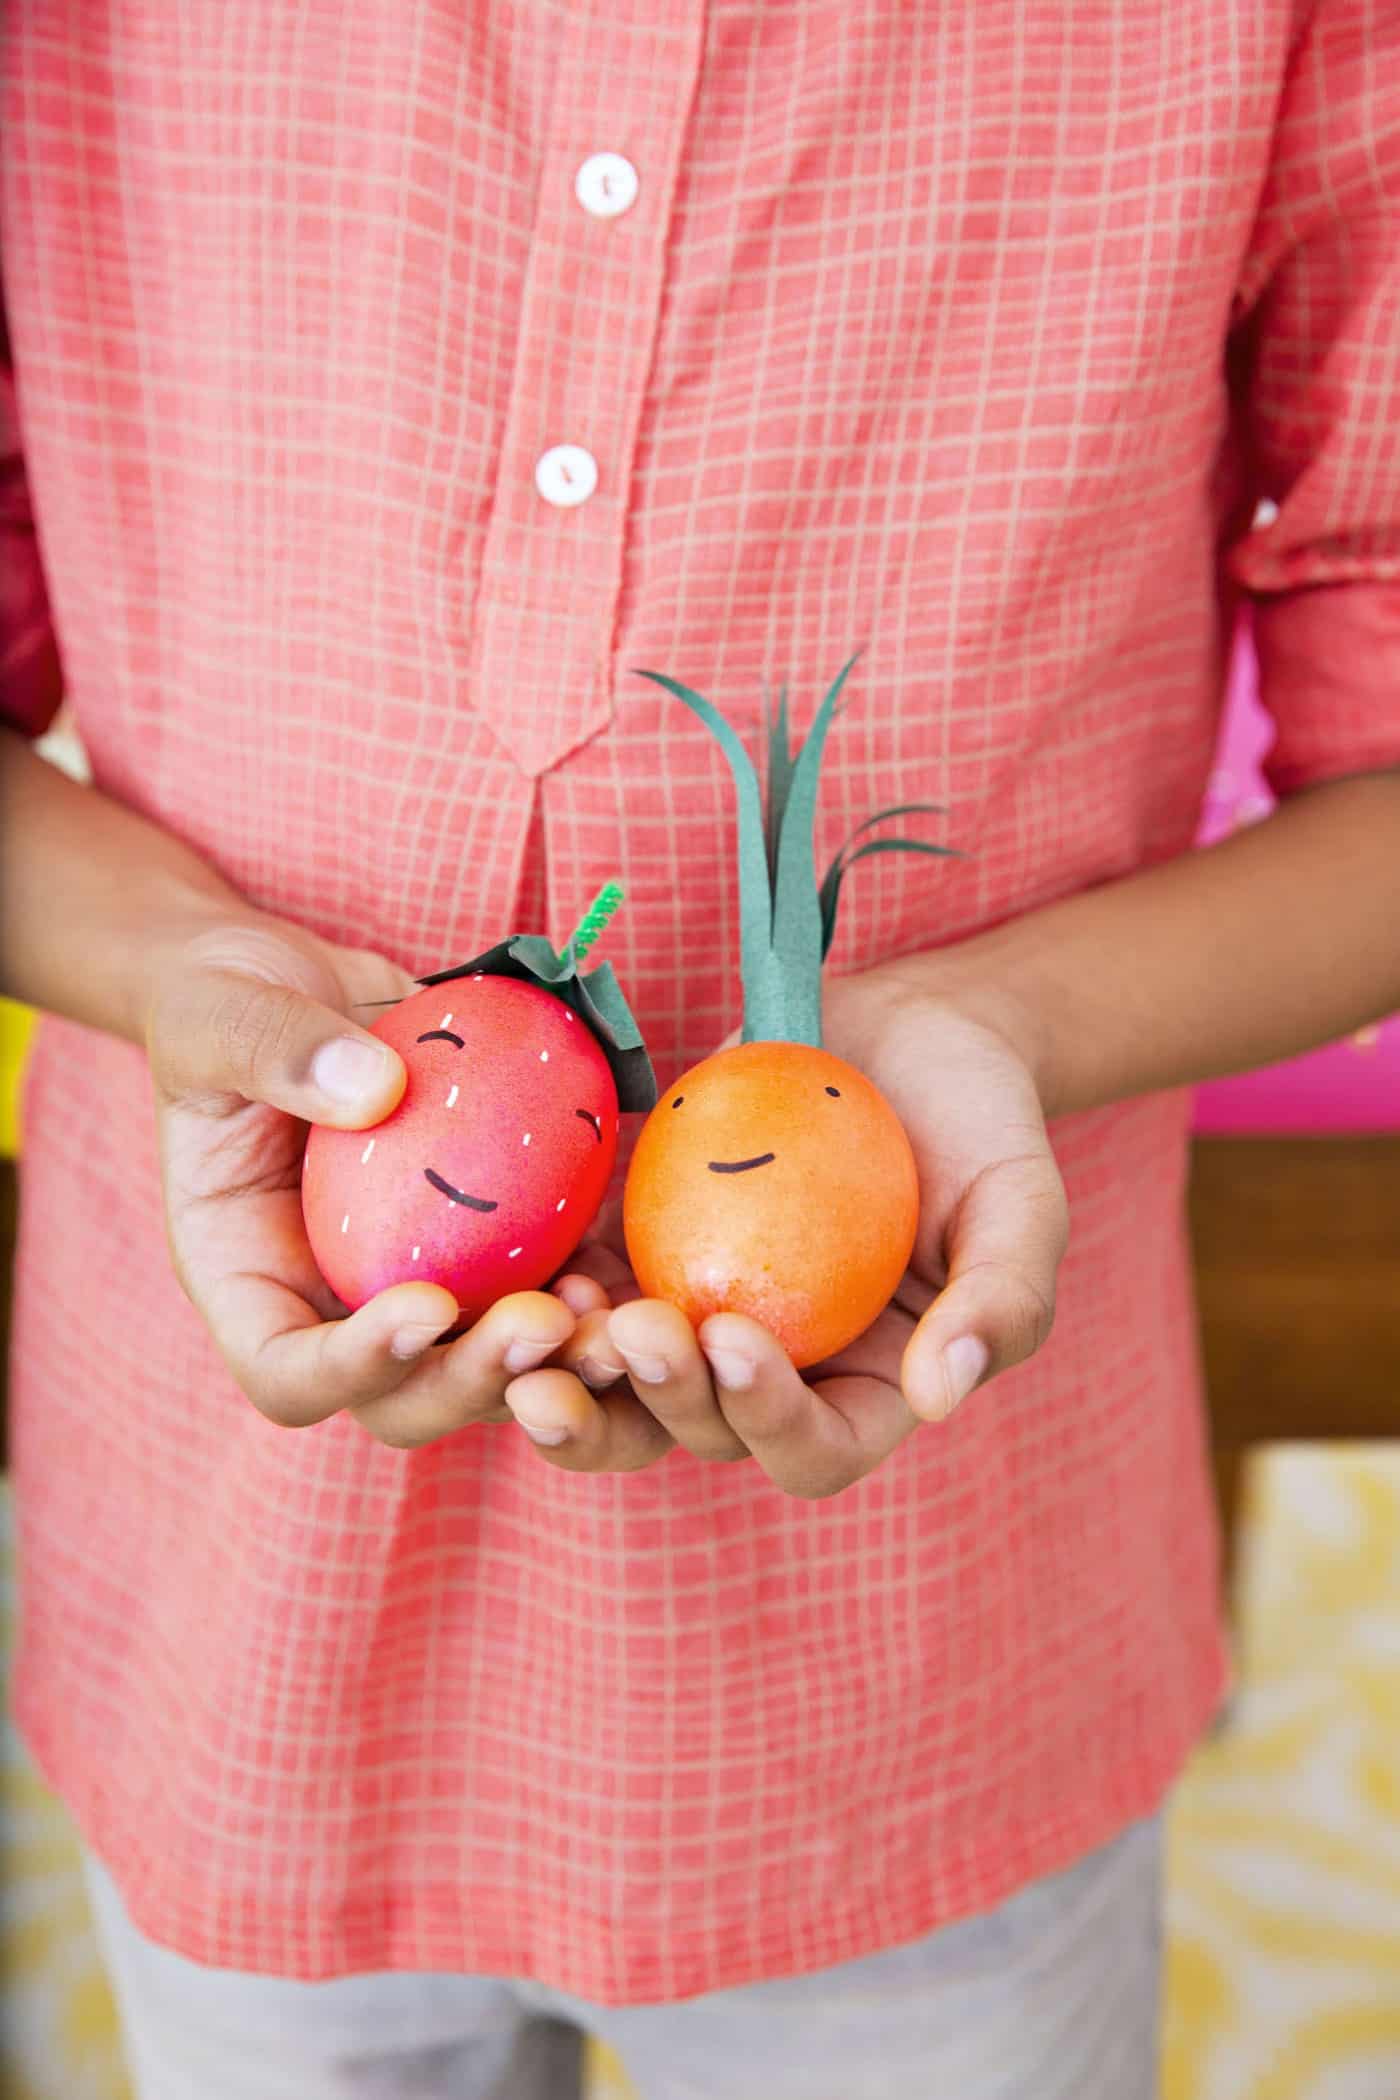 Here are four fun and colorful ways to decorate Easter eggs that kids will love. Use these ideas for a holiday party - you'll love seeing their creations!